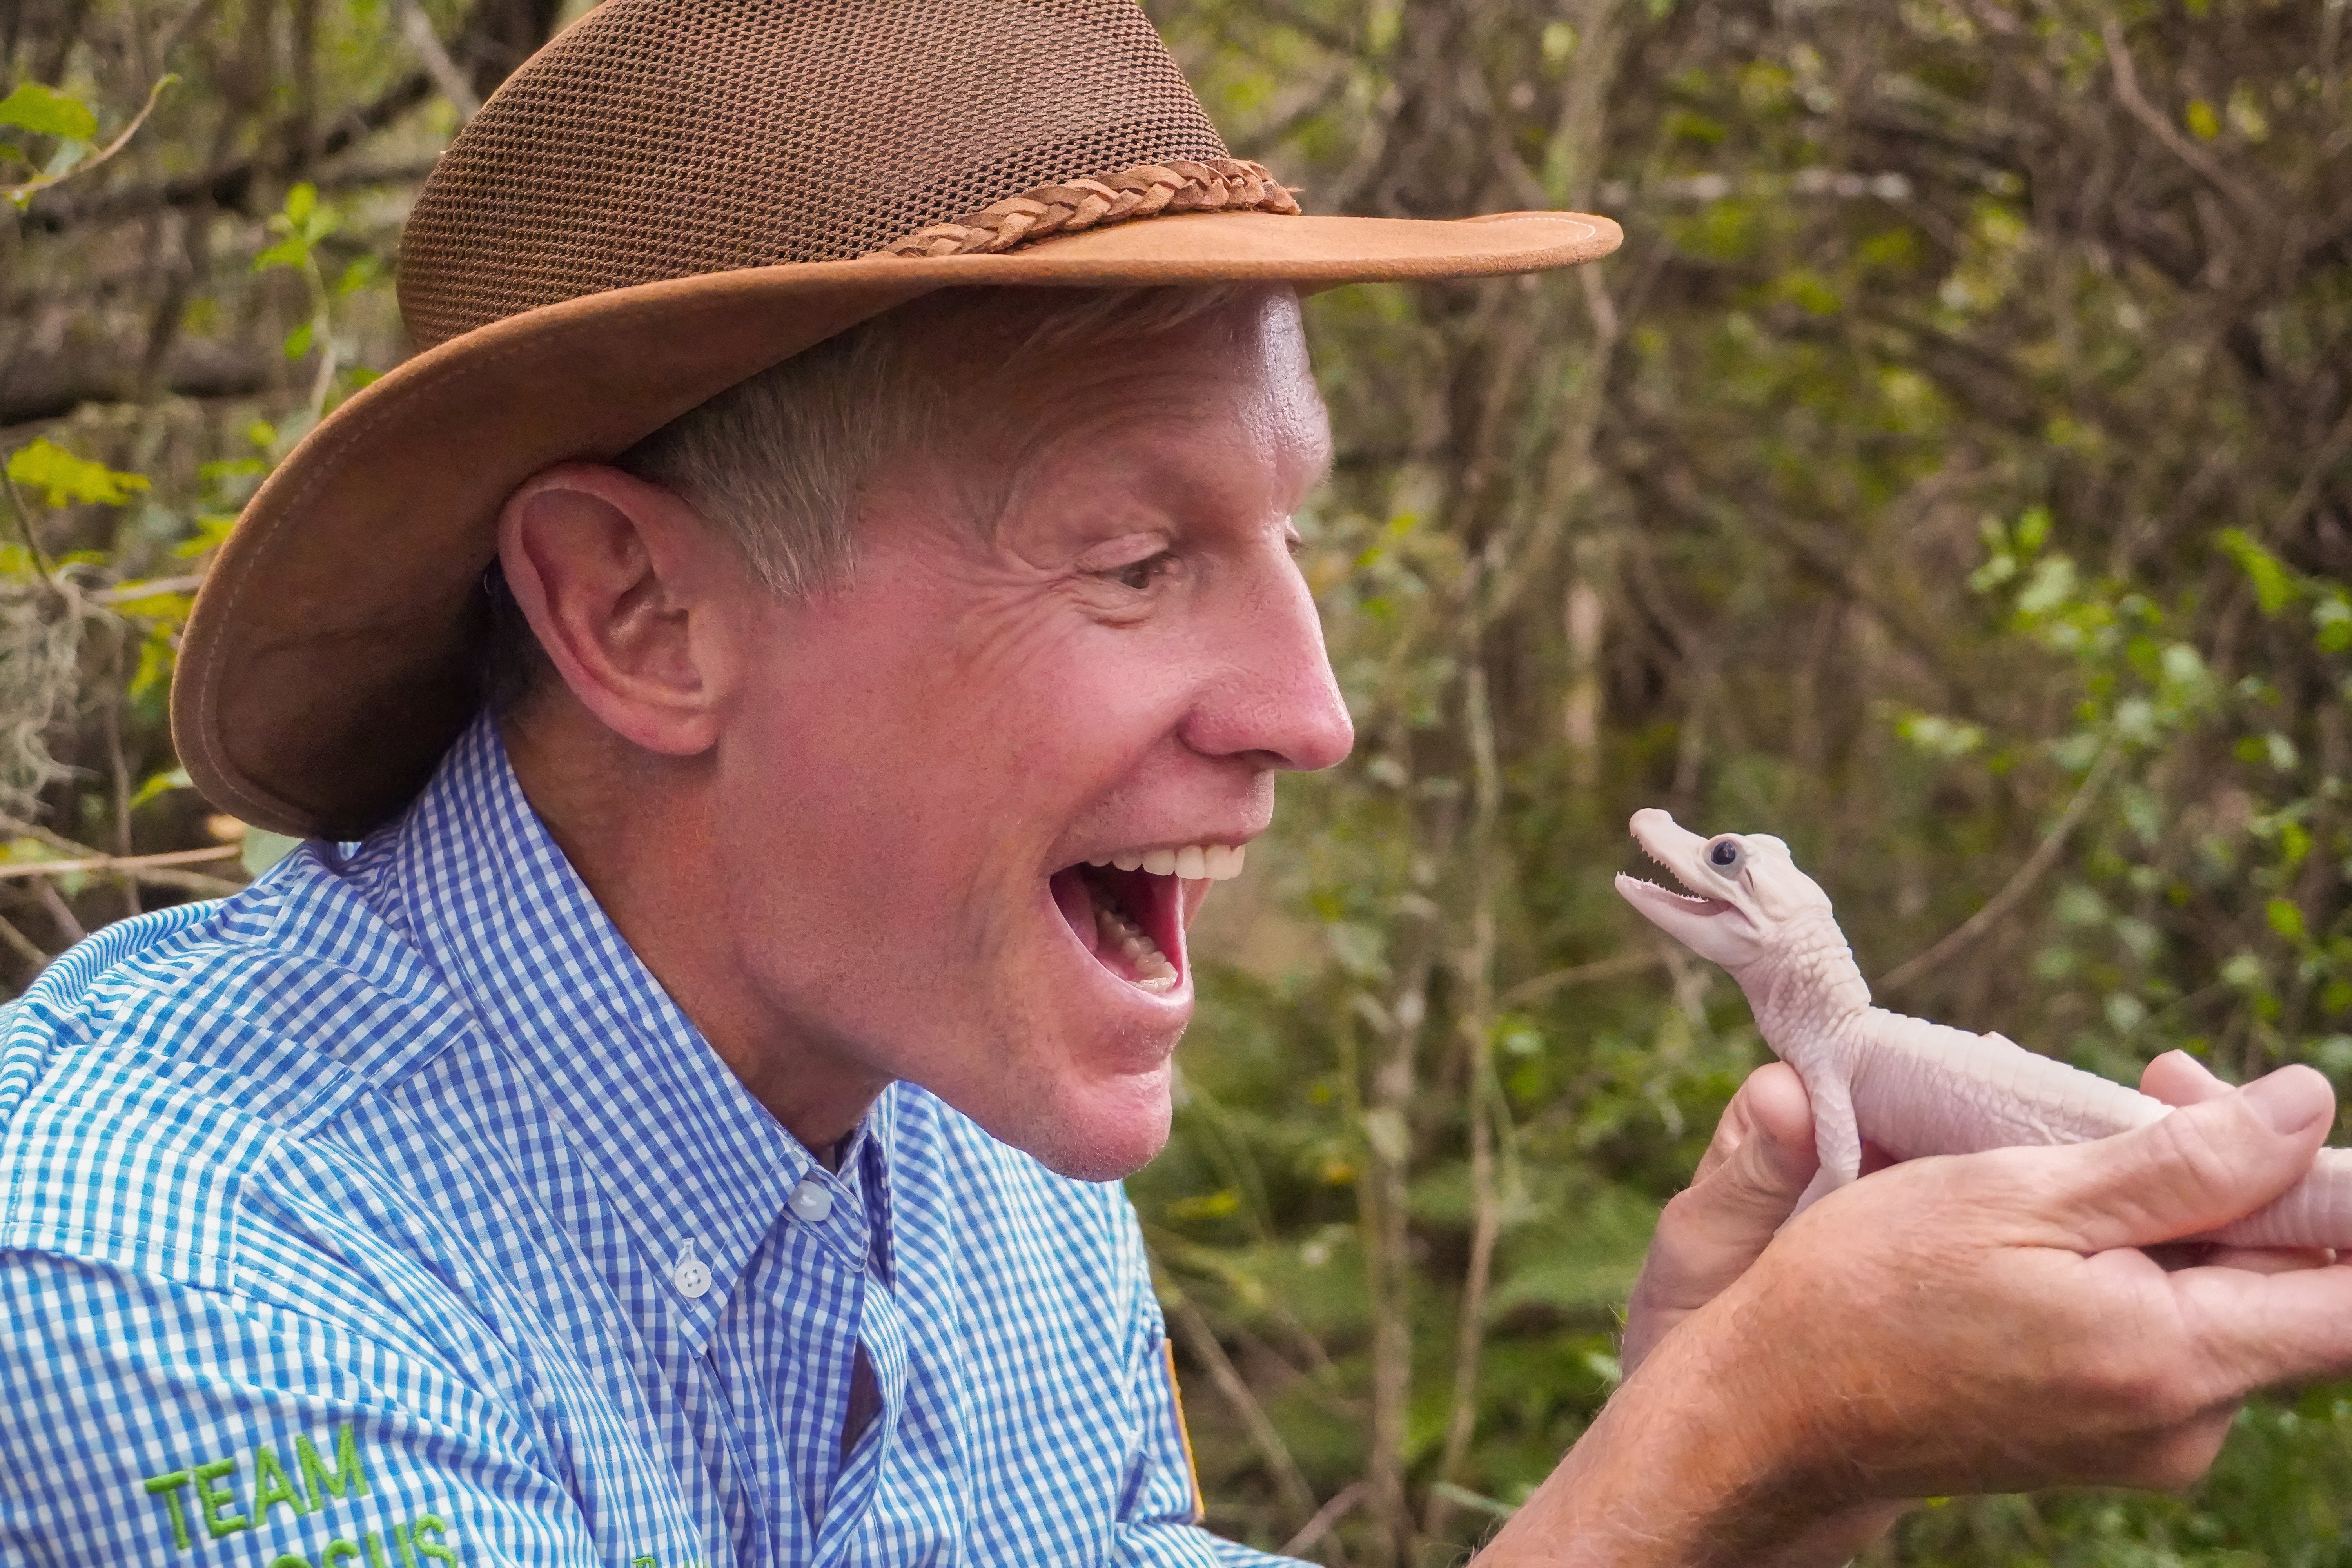 Gatorland’s CEO Mark McHugh smiling with the new baby